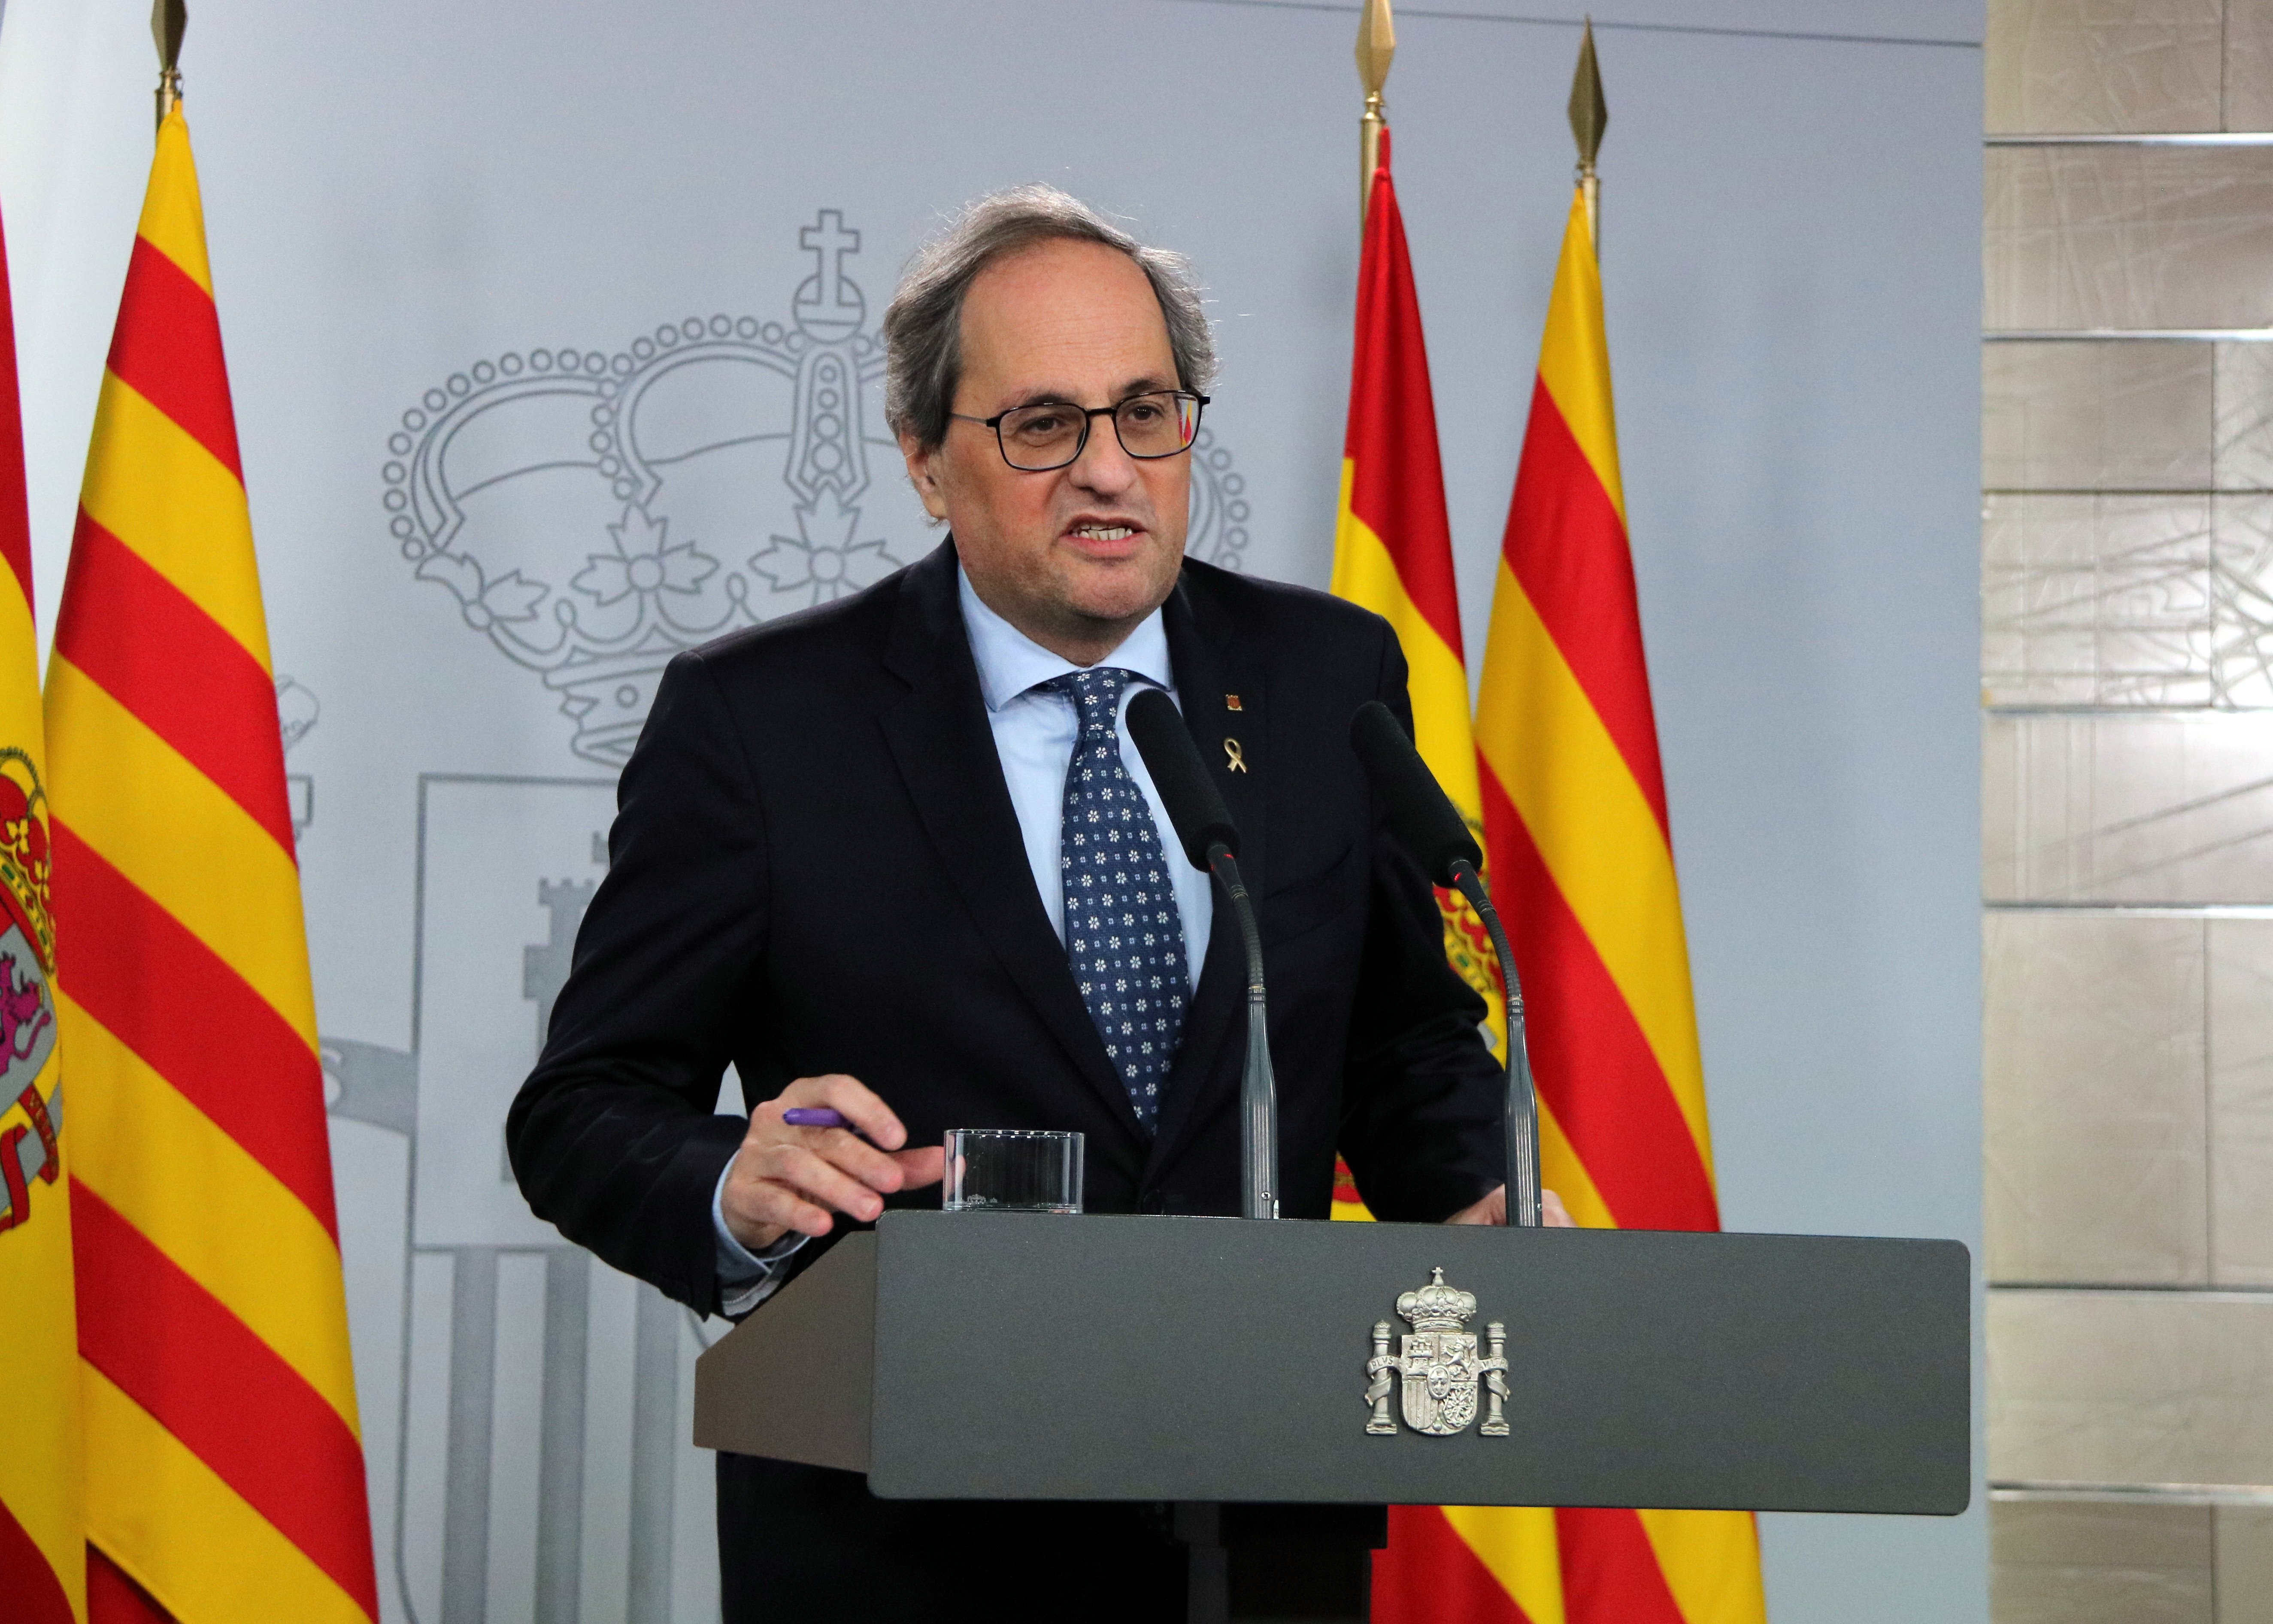 Torra leaves meeting with "no clear response" on any of Catalonia's big questions